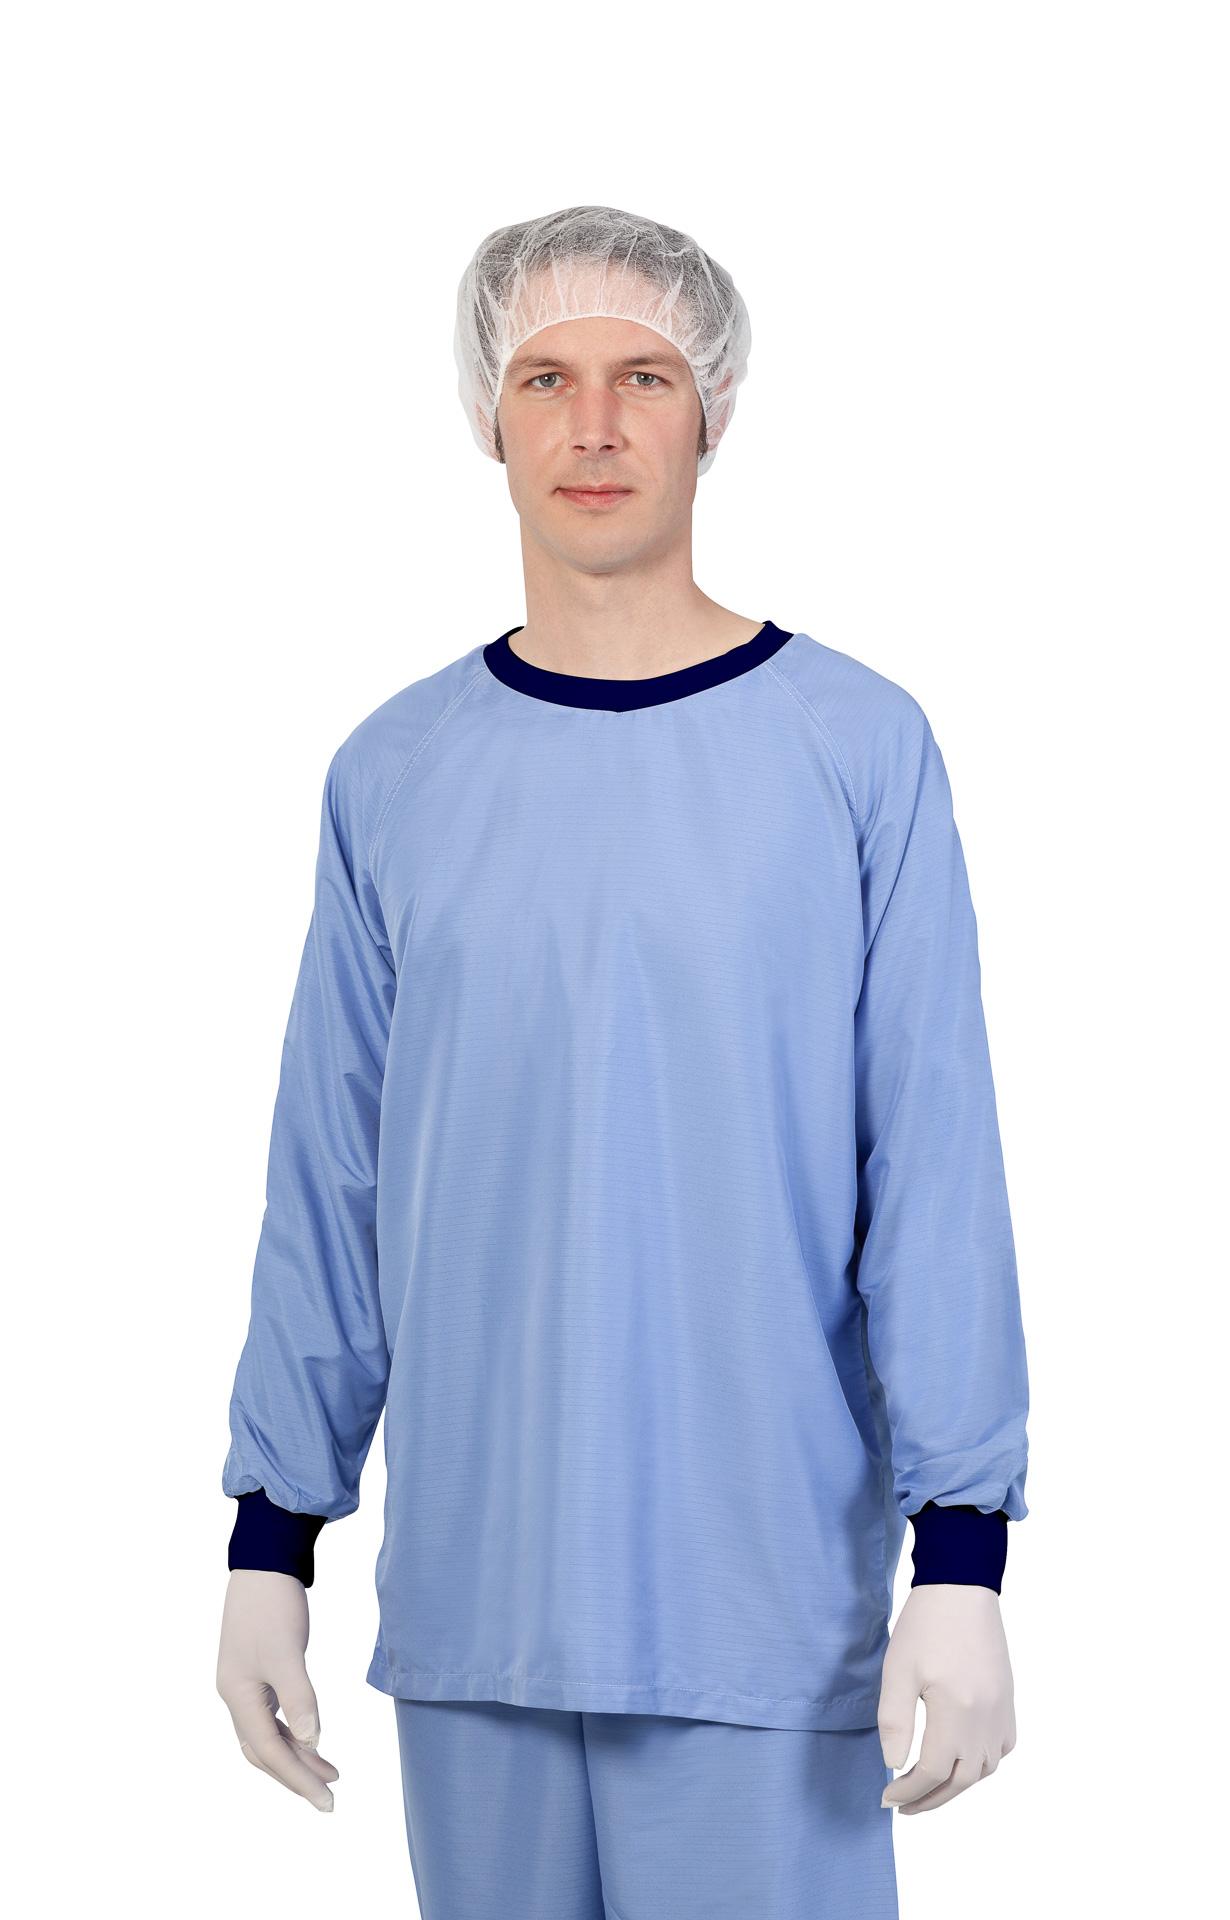 Cleanroom reusable underwear upper part, for cleanroom class ISO 7-8, GMP B-C